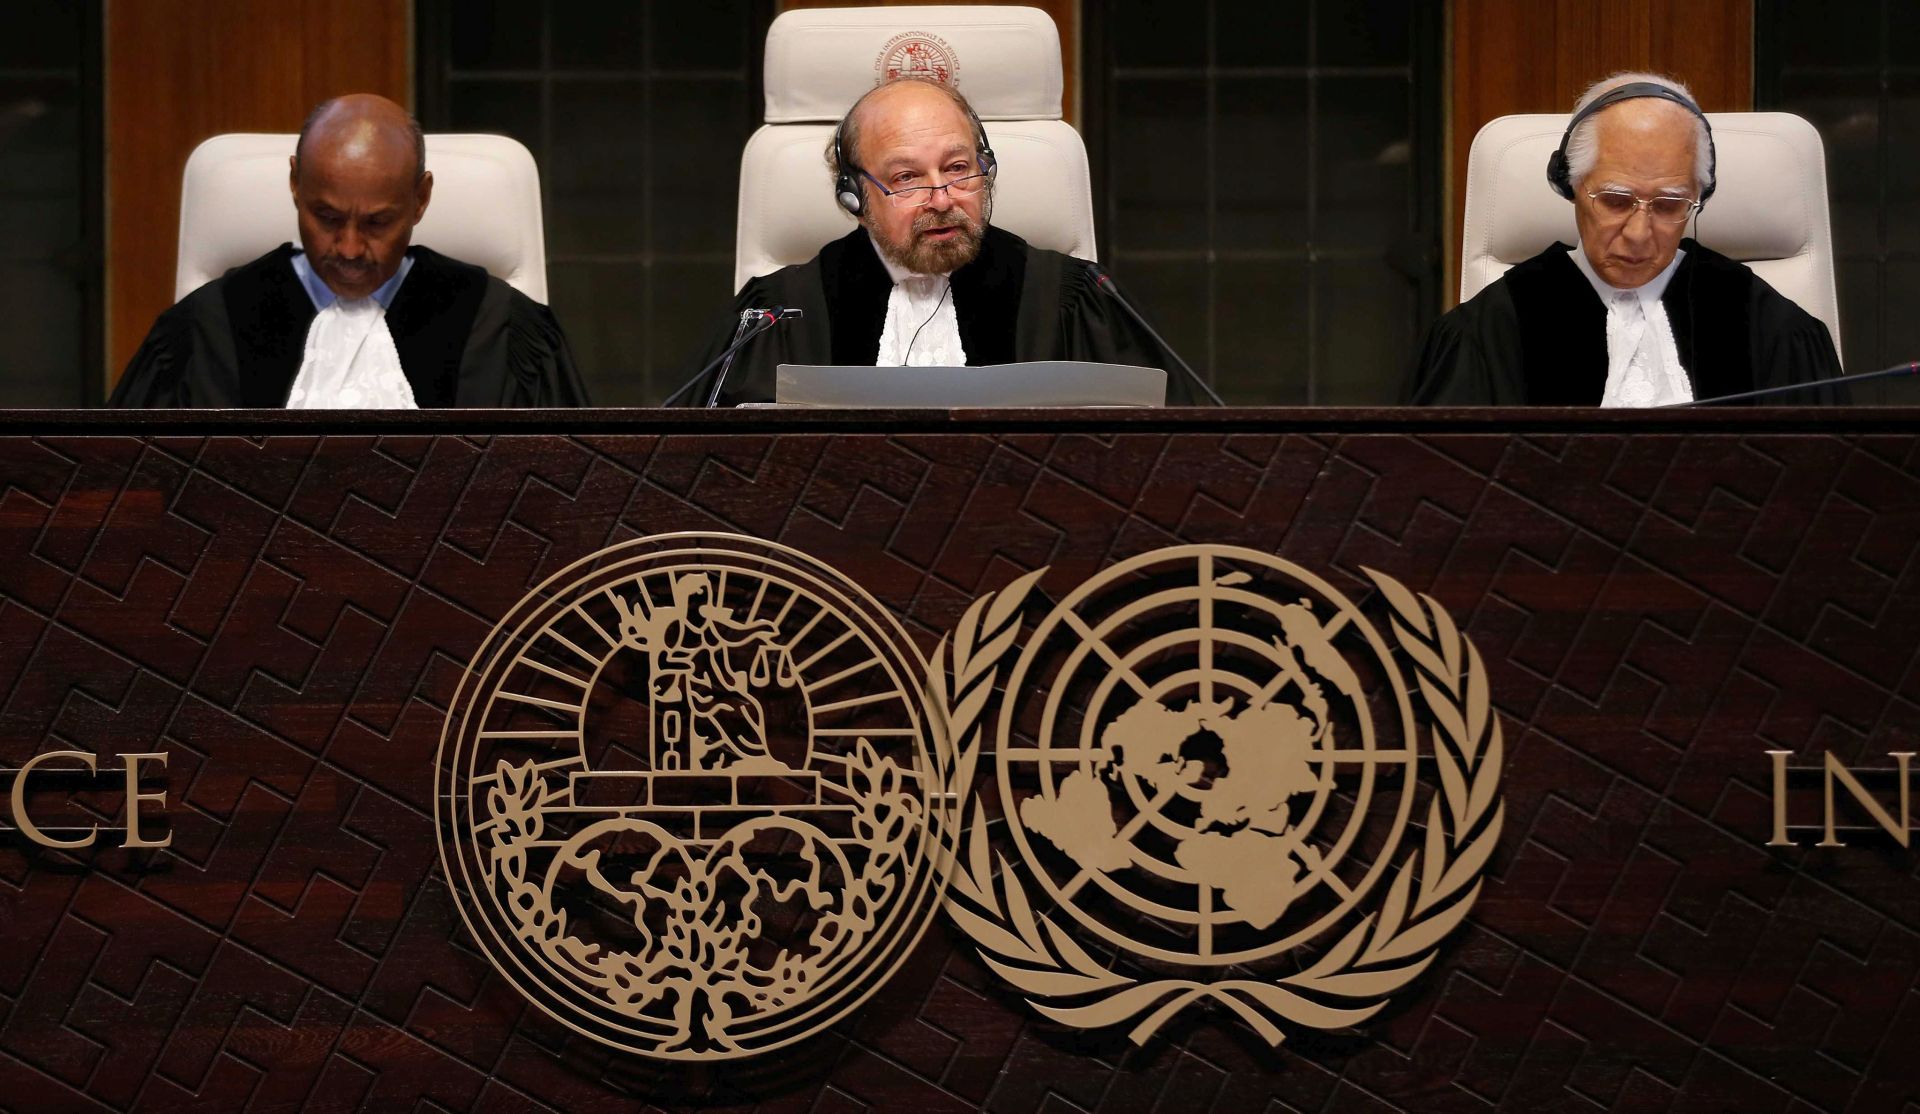 epa05071265 President of the International Court of Justice (ICJ) Ronny Abraham (C), vice-president Abdulqawi Yusuf (L) and judge Hisashi Owada (R) during the court case on the border dispute between Costa Rica and Nicaragua in the ICJ courtroom in the Hague, the Netherlands, 16 December 2015. According to reports, the Hague-based ICJ will issue its final ruling on 16 December on cases raised by Costa Rica and Nicaragua over border disputes.  EPA/BAS CZERWINSKI